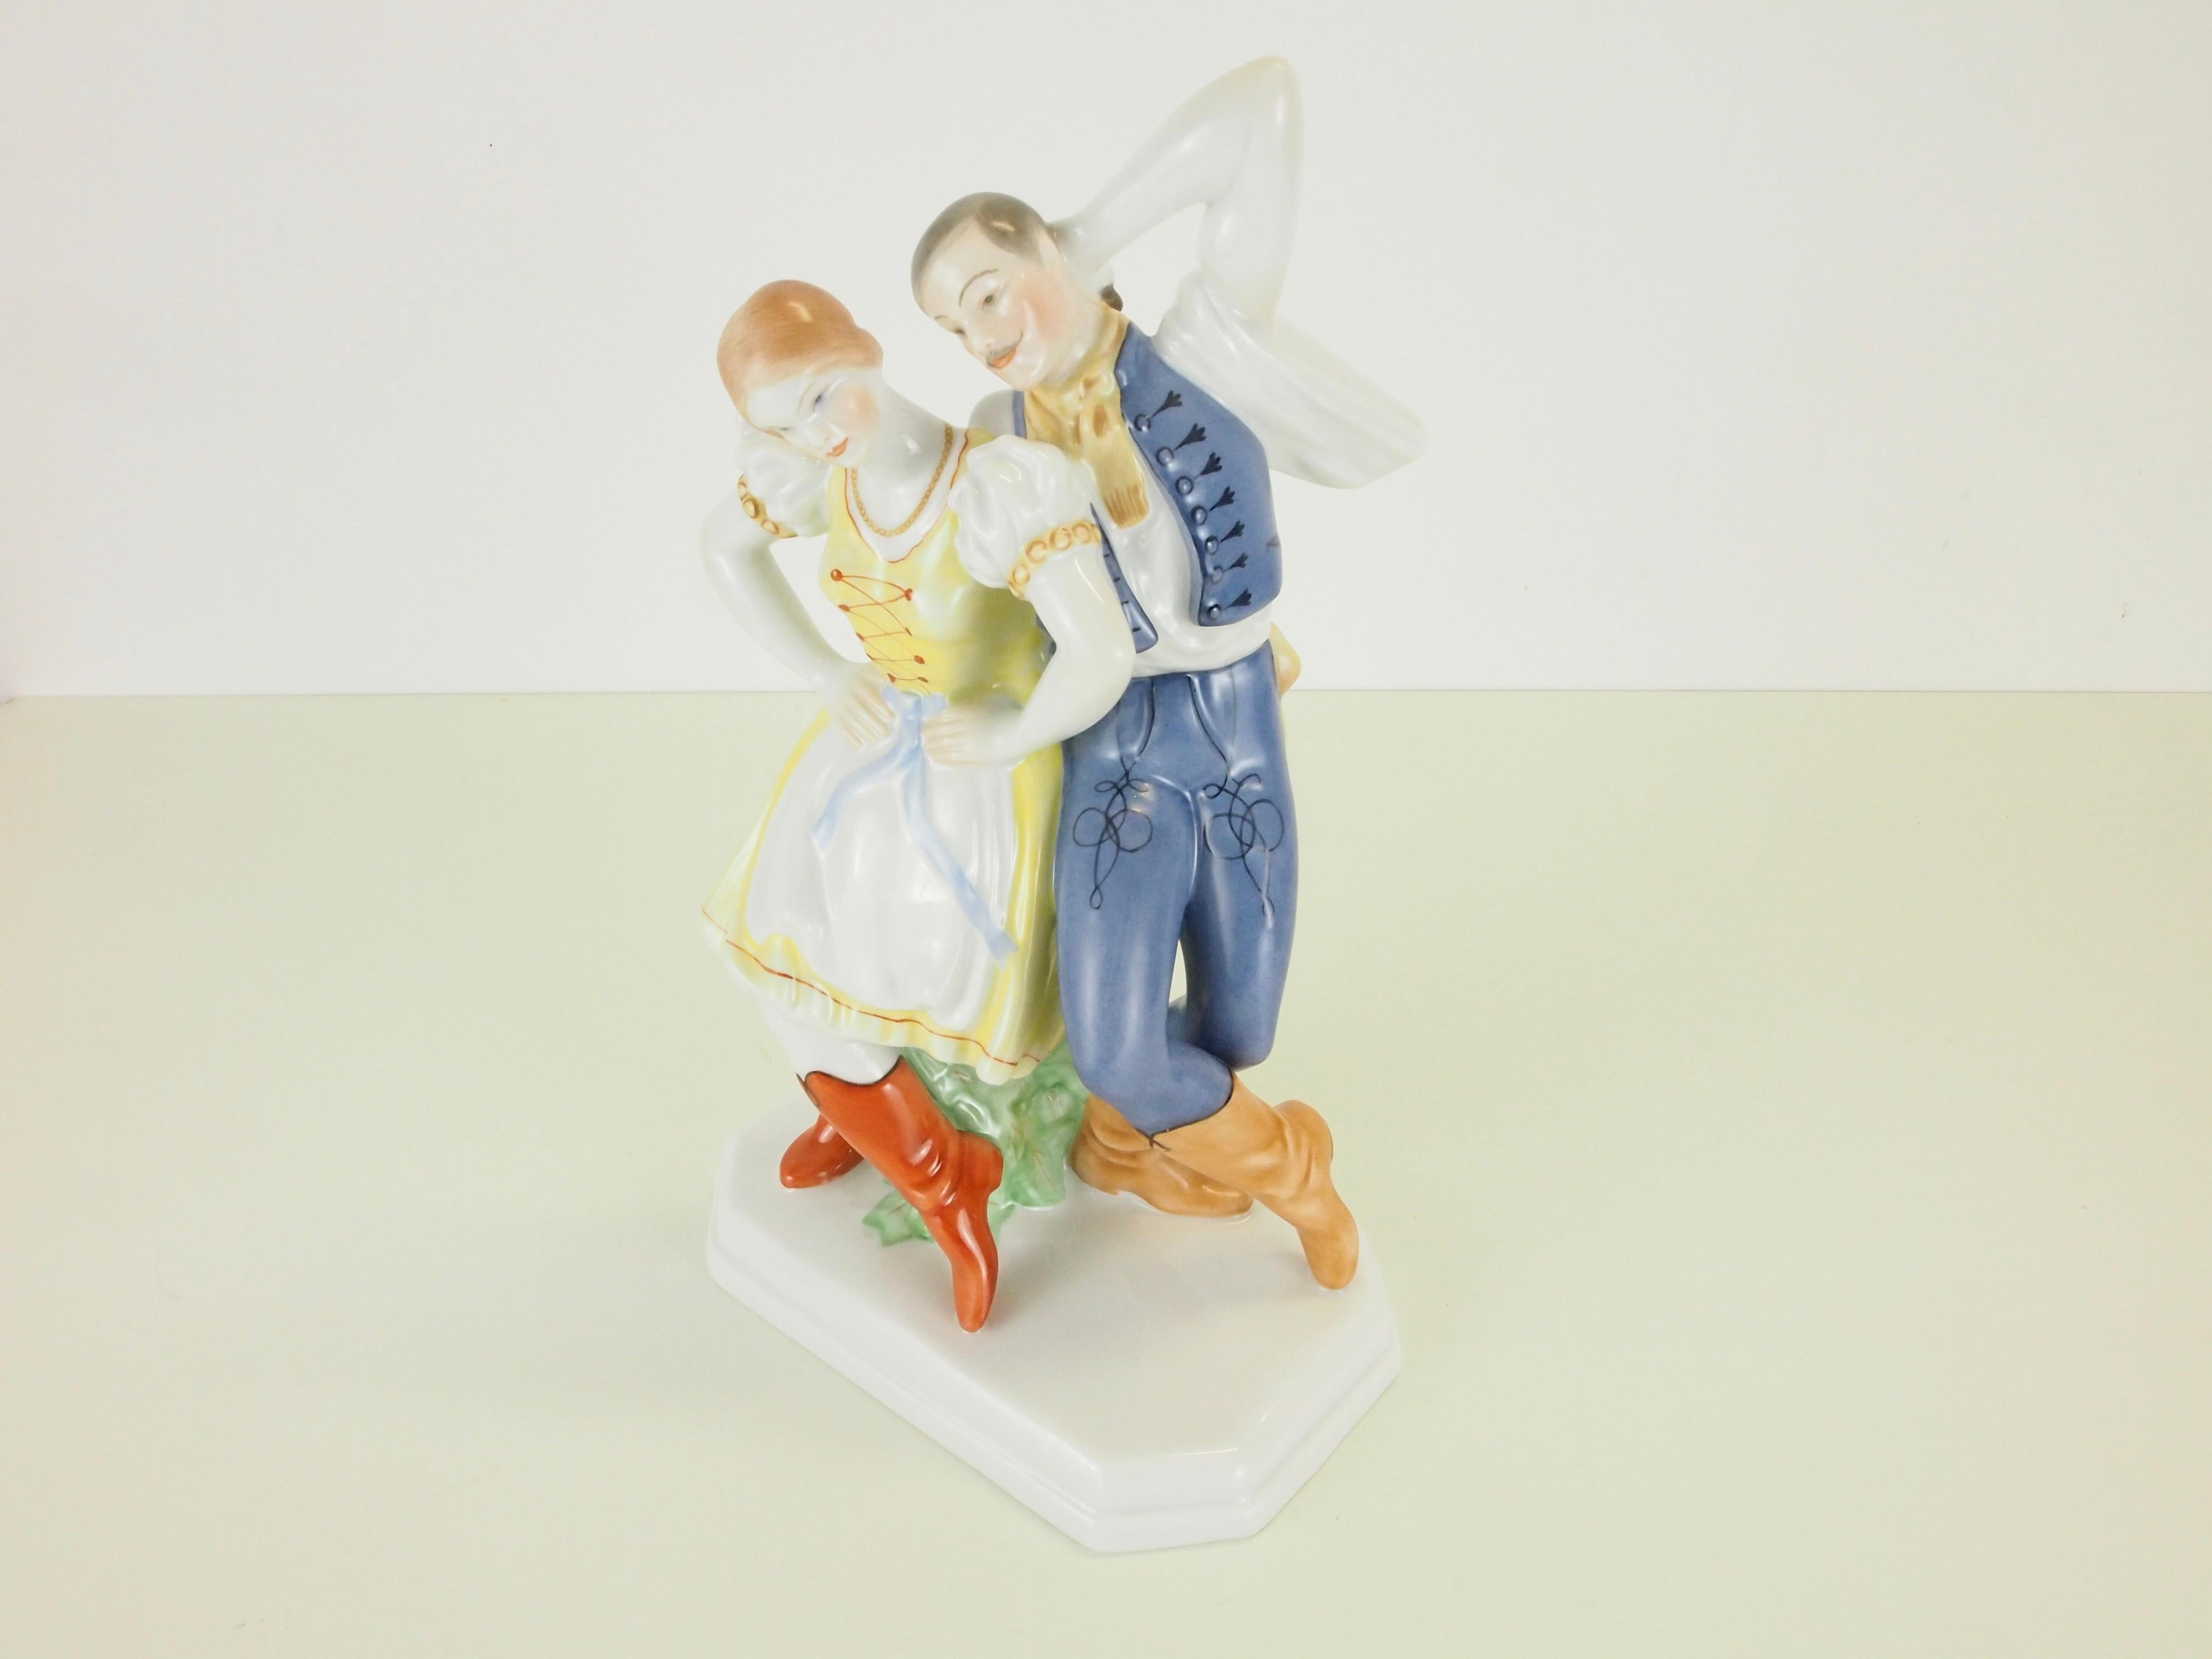 Dancing Couple Porcelain Figurine by Herend Hungary For Sale 6